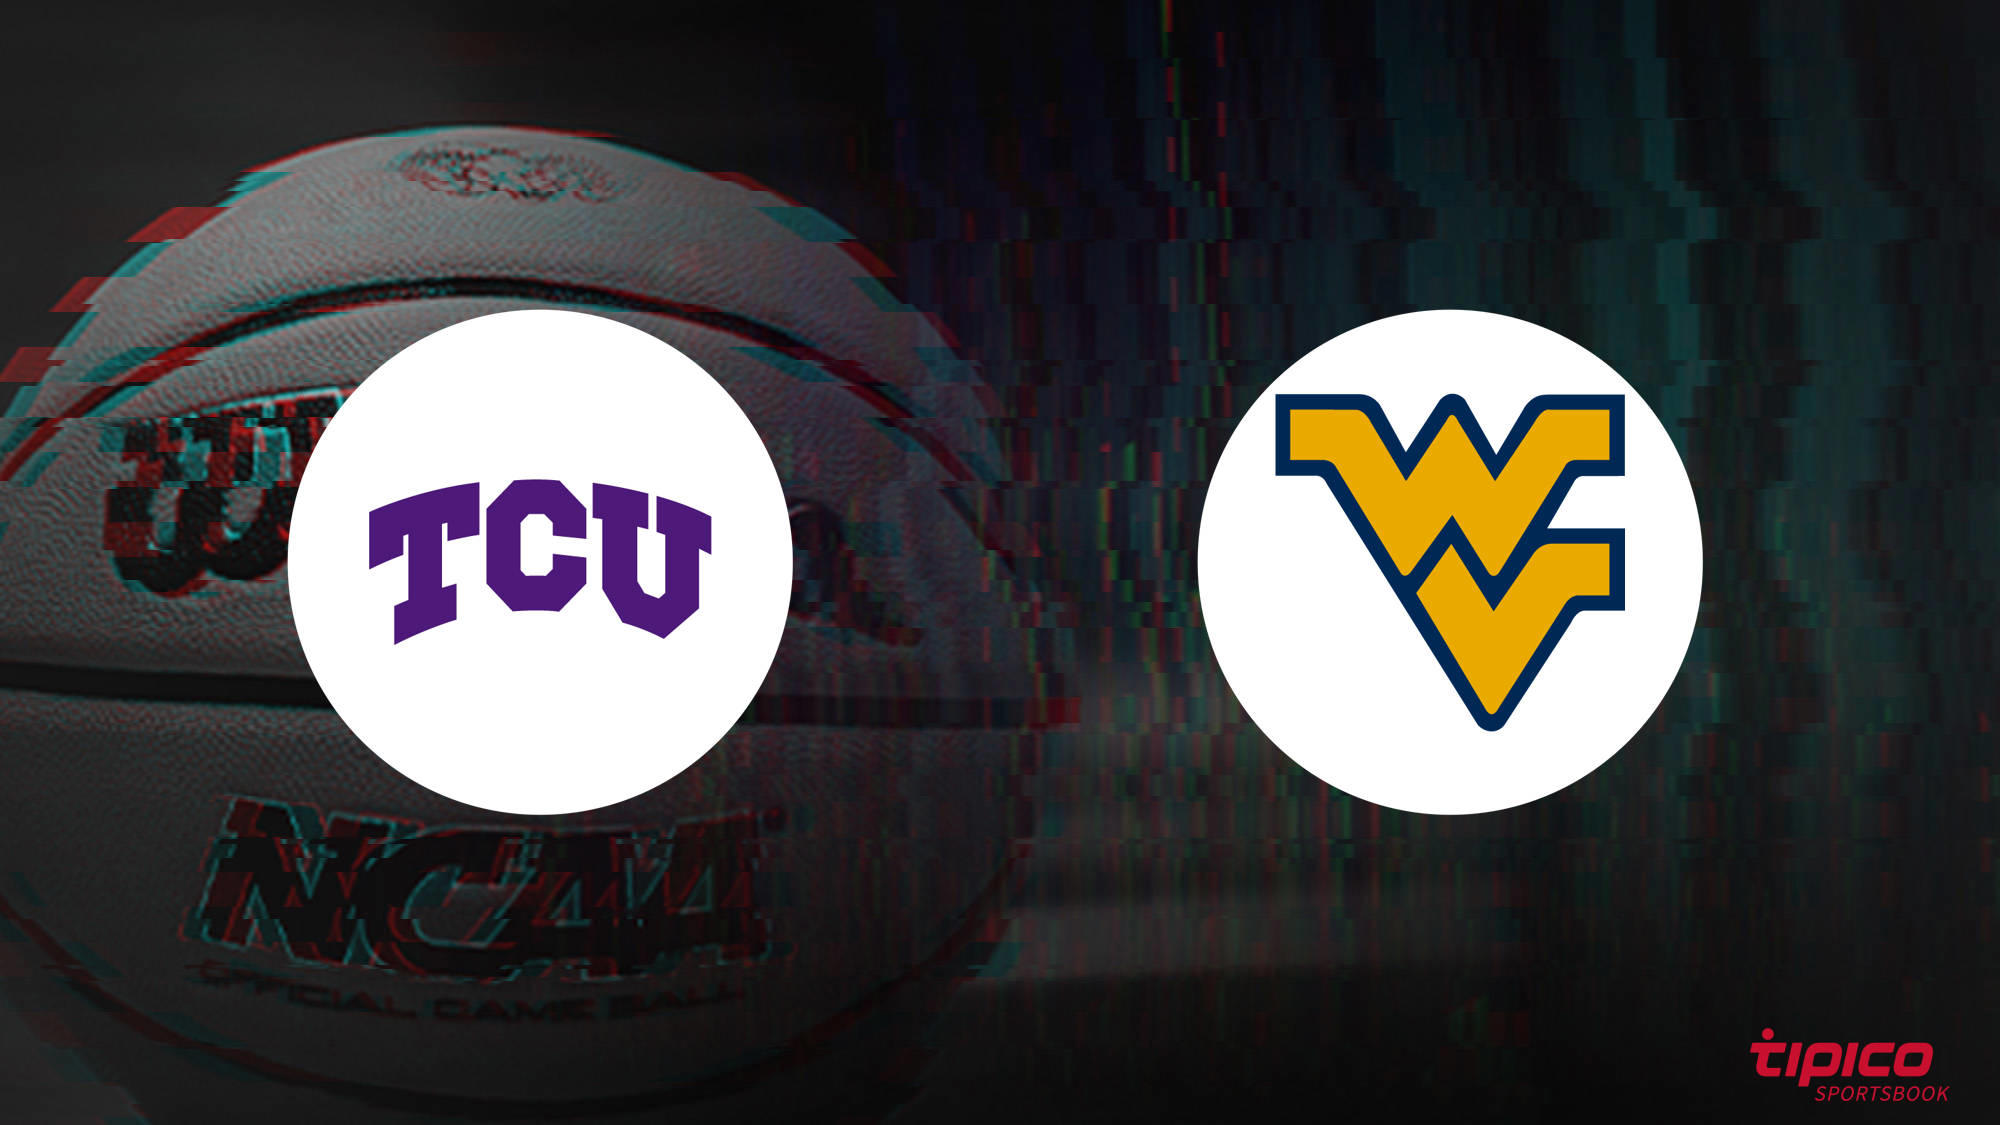 TCU Horned Frogs vs. West Virginia Mountaineers Preview